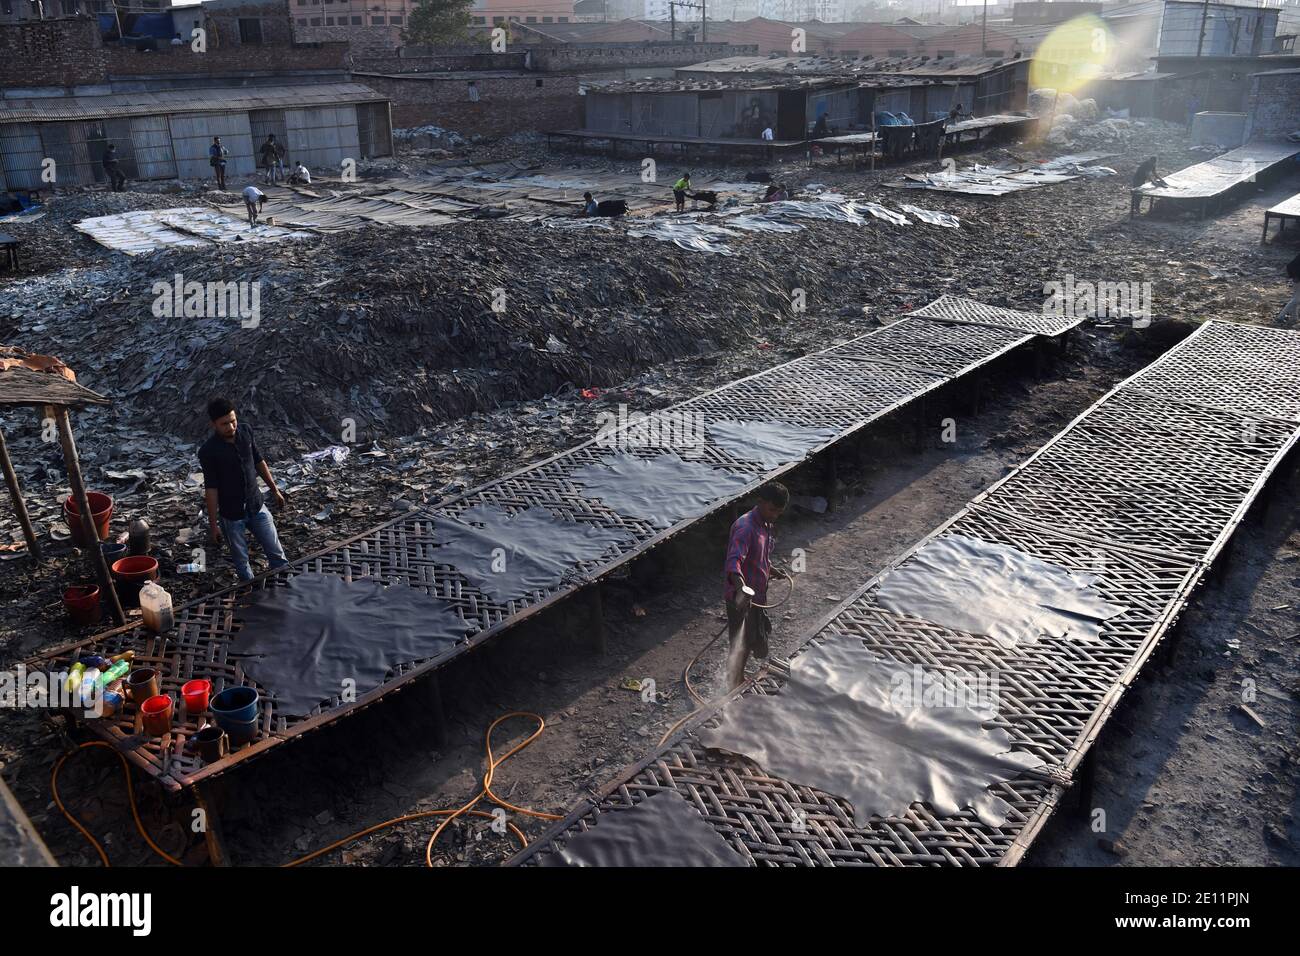 Labourers working at a tannery factory in Hazaribagh.Due to the presence of toxic chemicals, mainly chromium. The tannery industry pollutes with smoke from its waste the air of Hazaribagh. Stock Photo